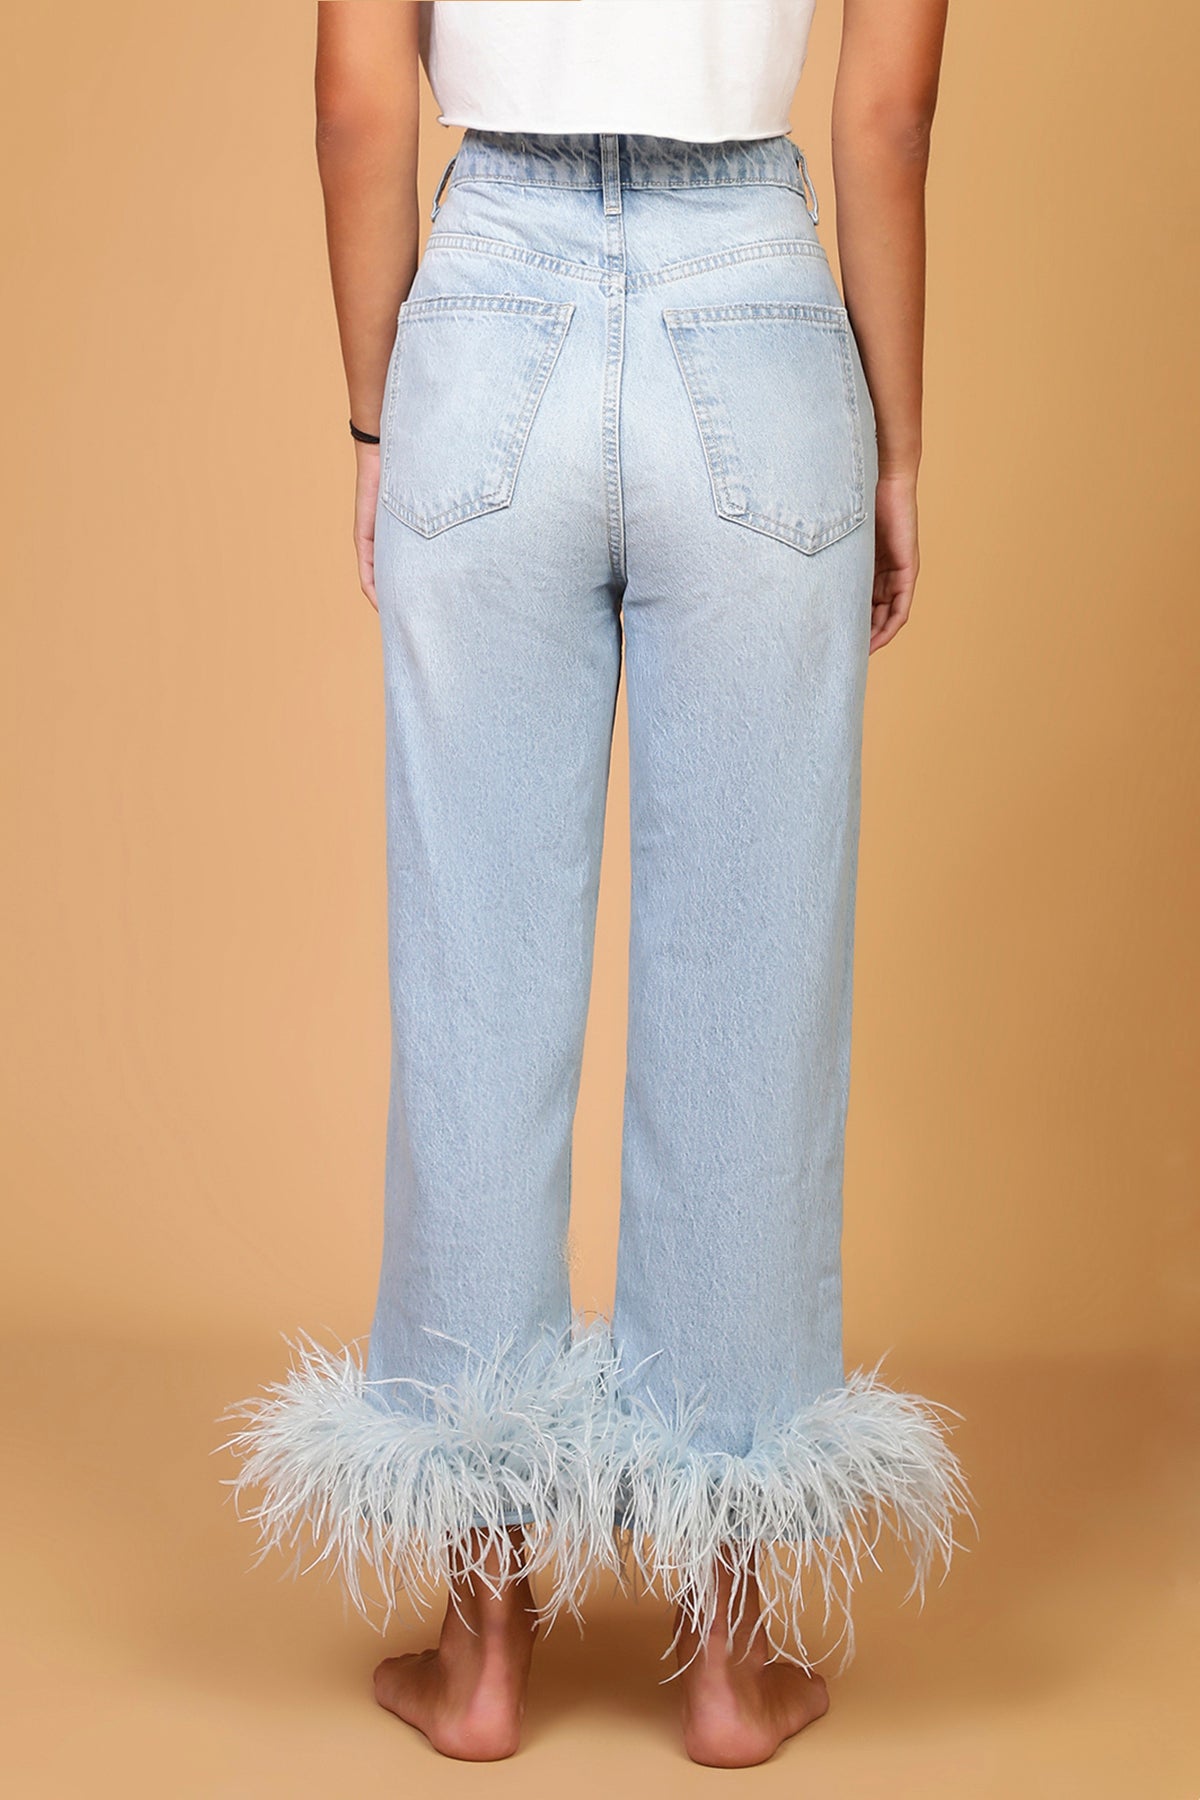 FEATHERS JEANS - LIGHT BLUE